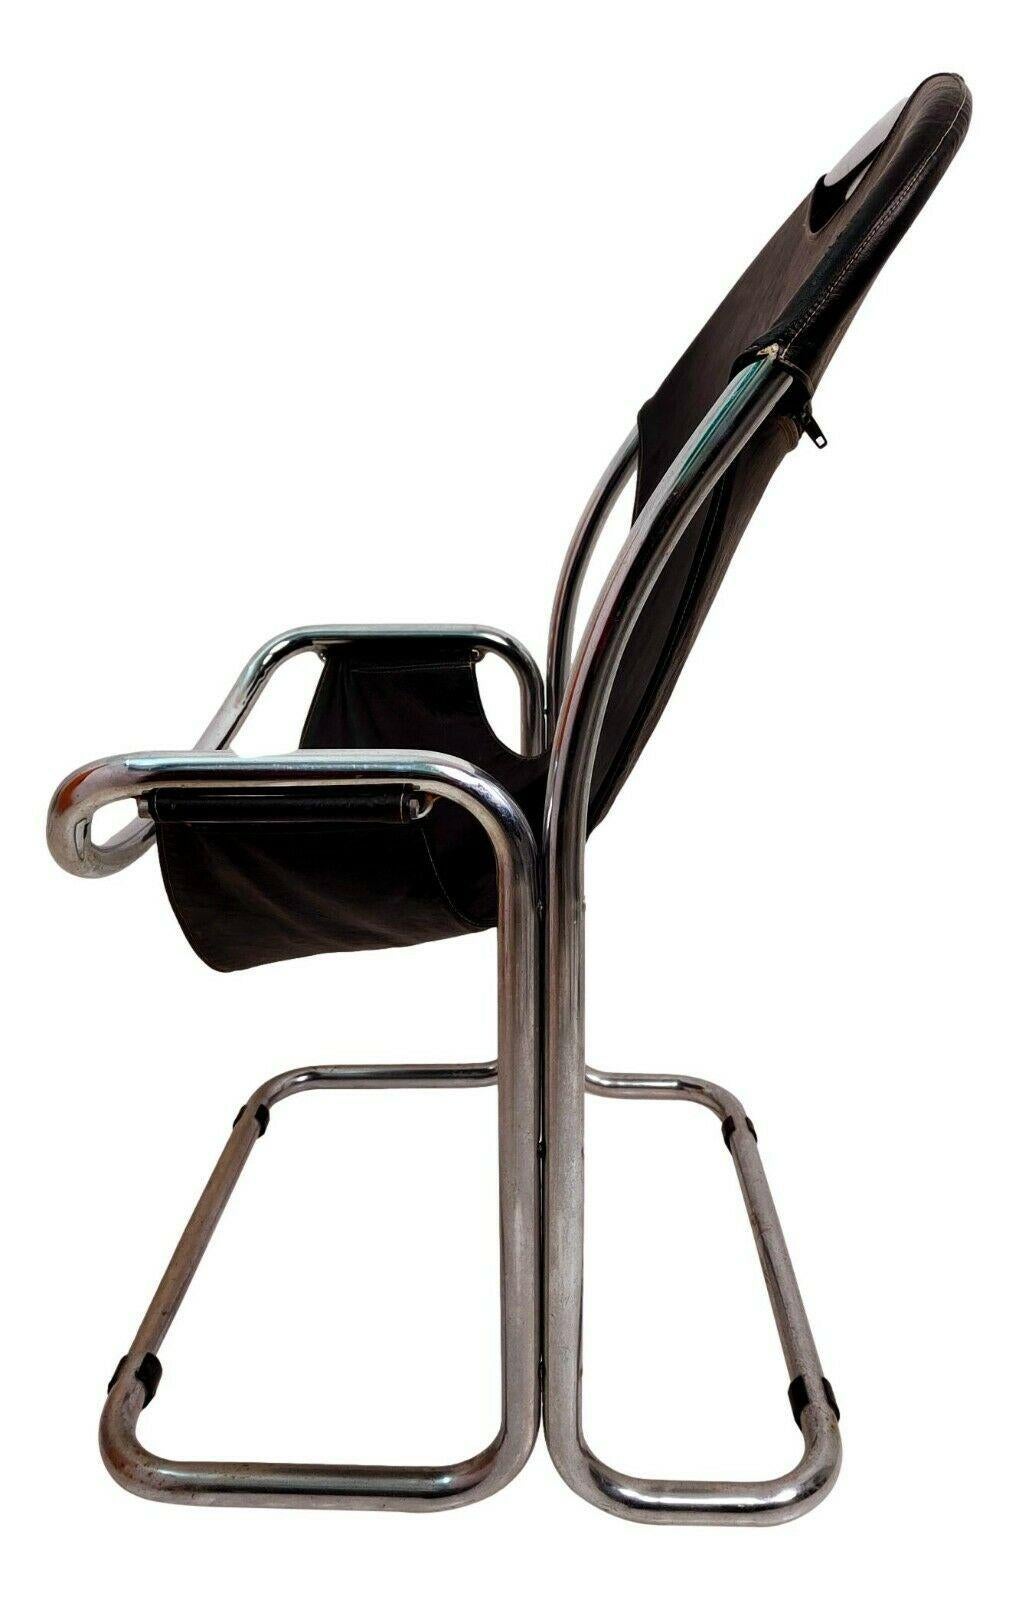 Italian Bauhaus Style Tubular Metal and Eco-Leather Collectible Chair, 1970s For Sale